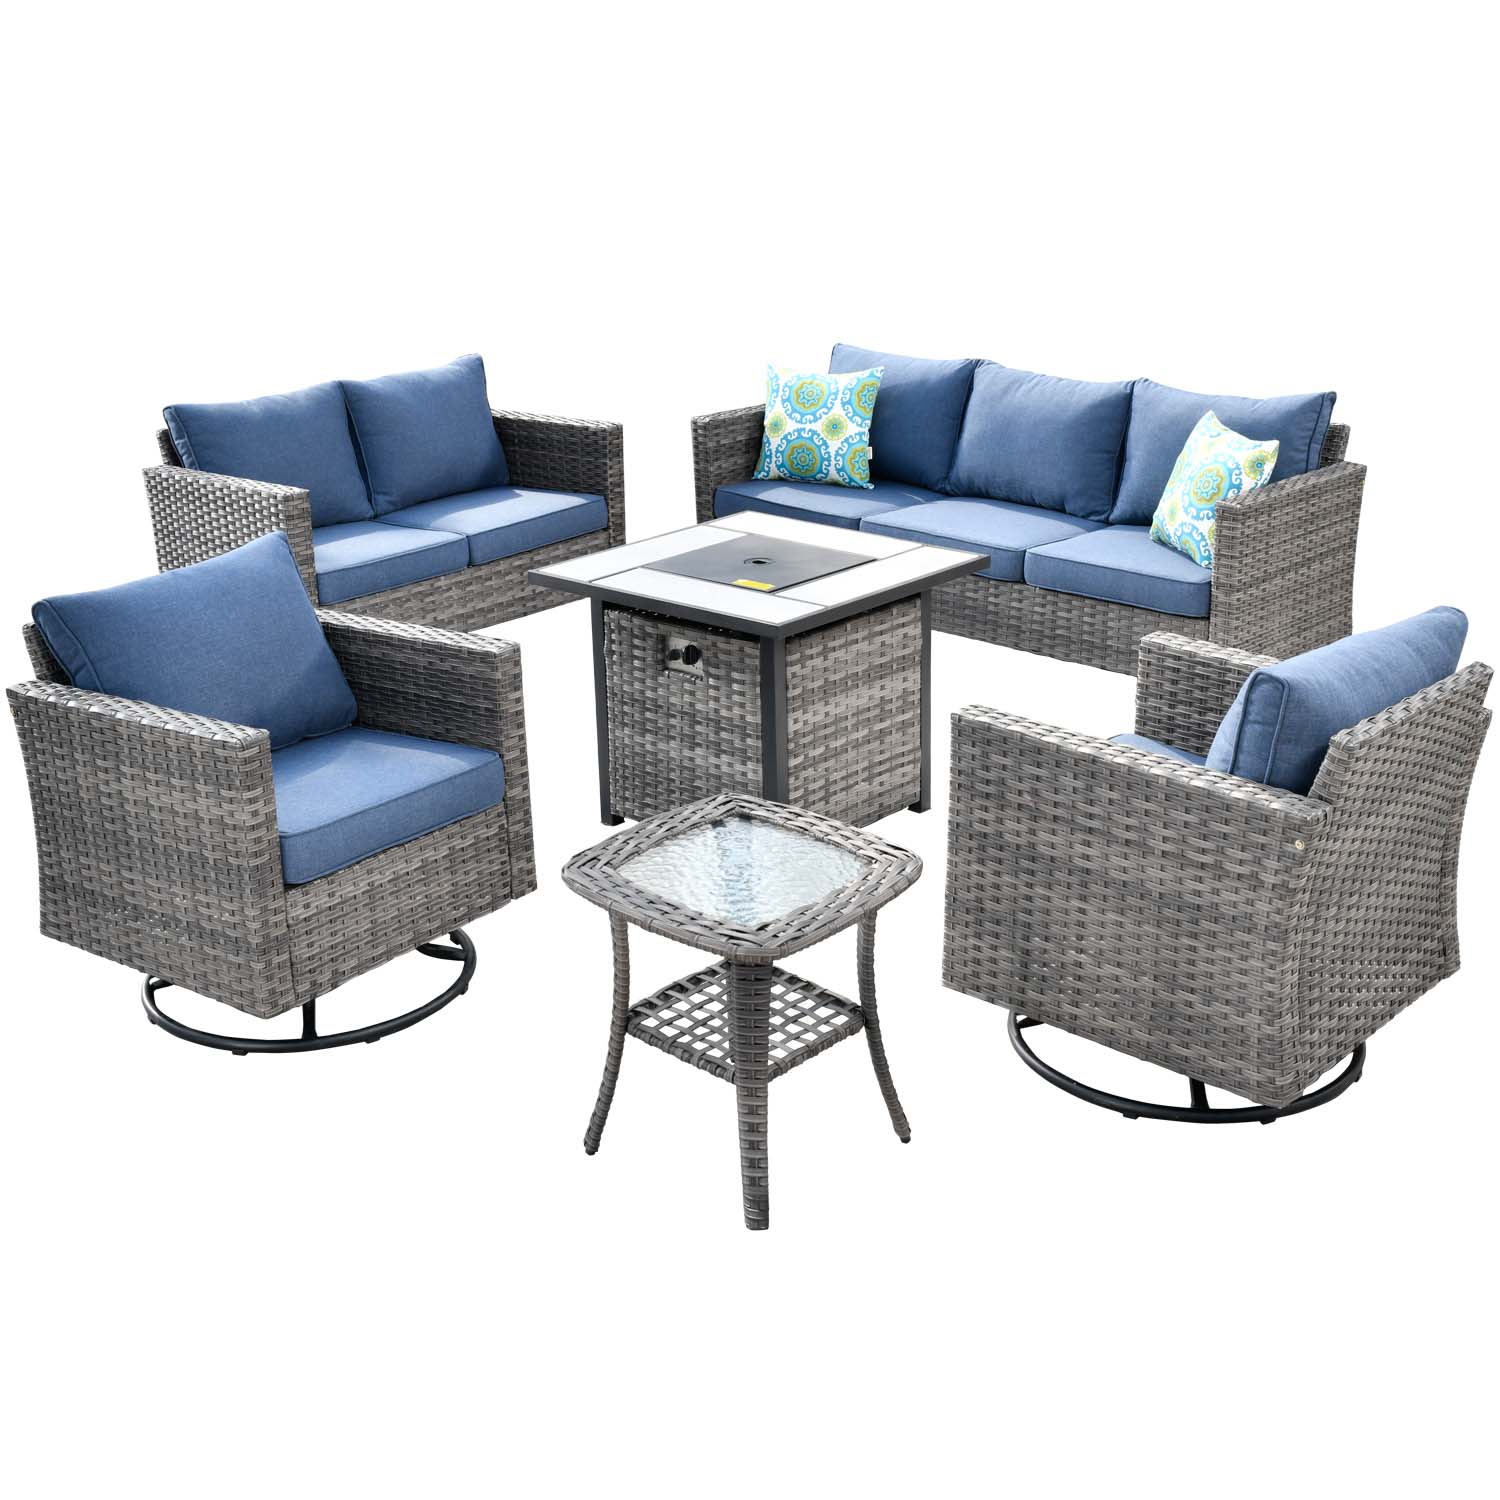 Ovios Patio Vultros 6-Piece Set With Swivel Chair Lover seat and 30'' Propane Fire Pit Table